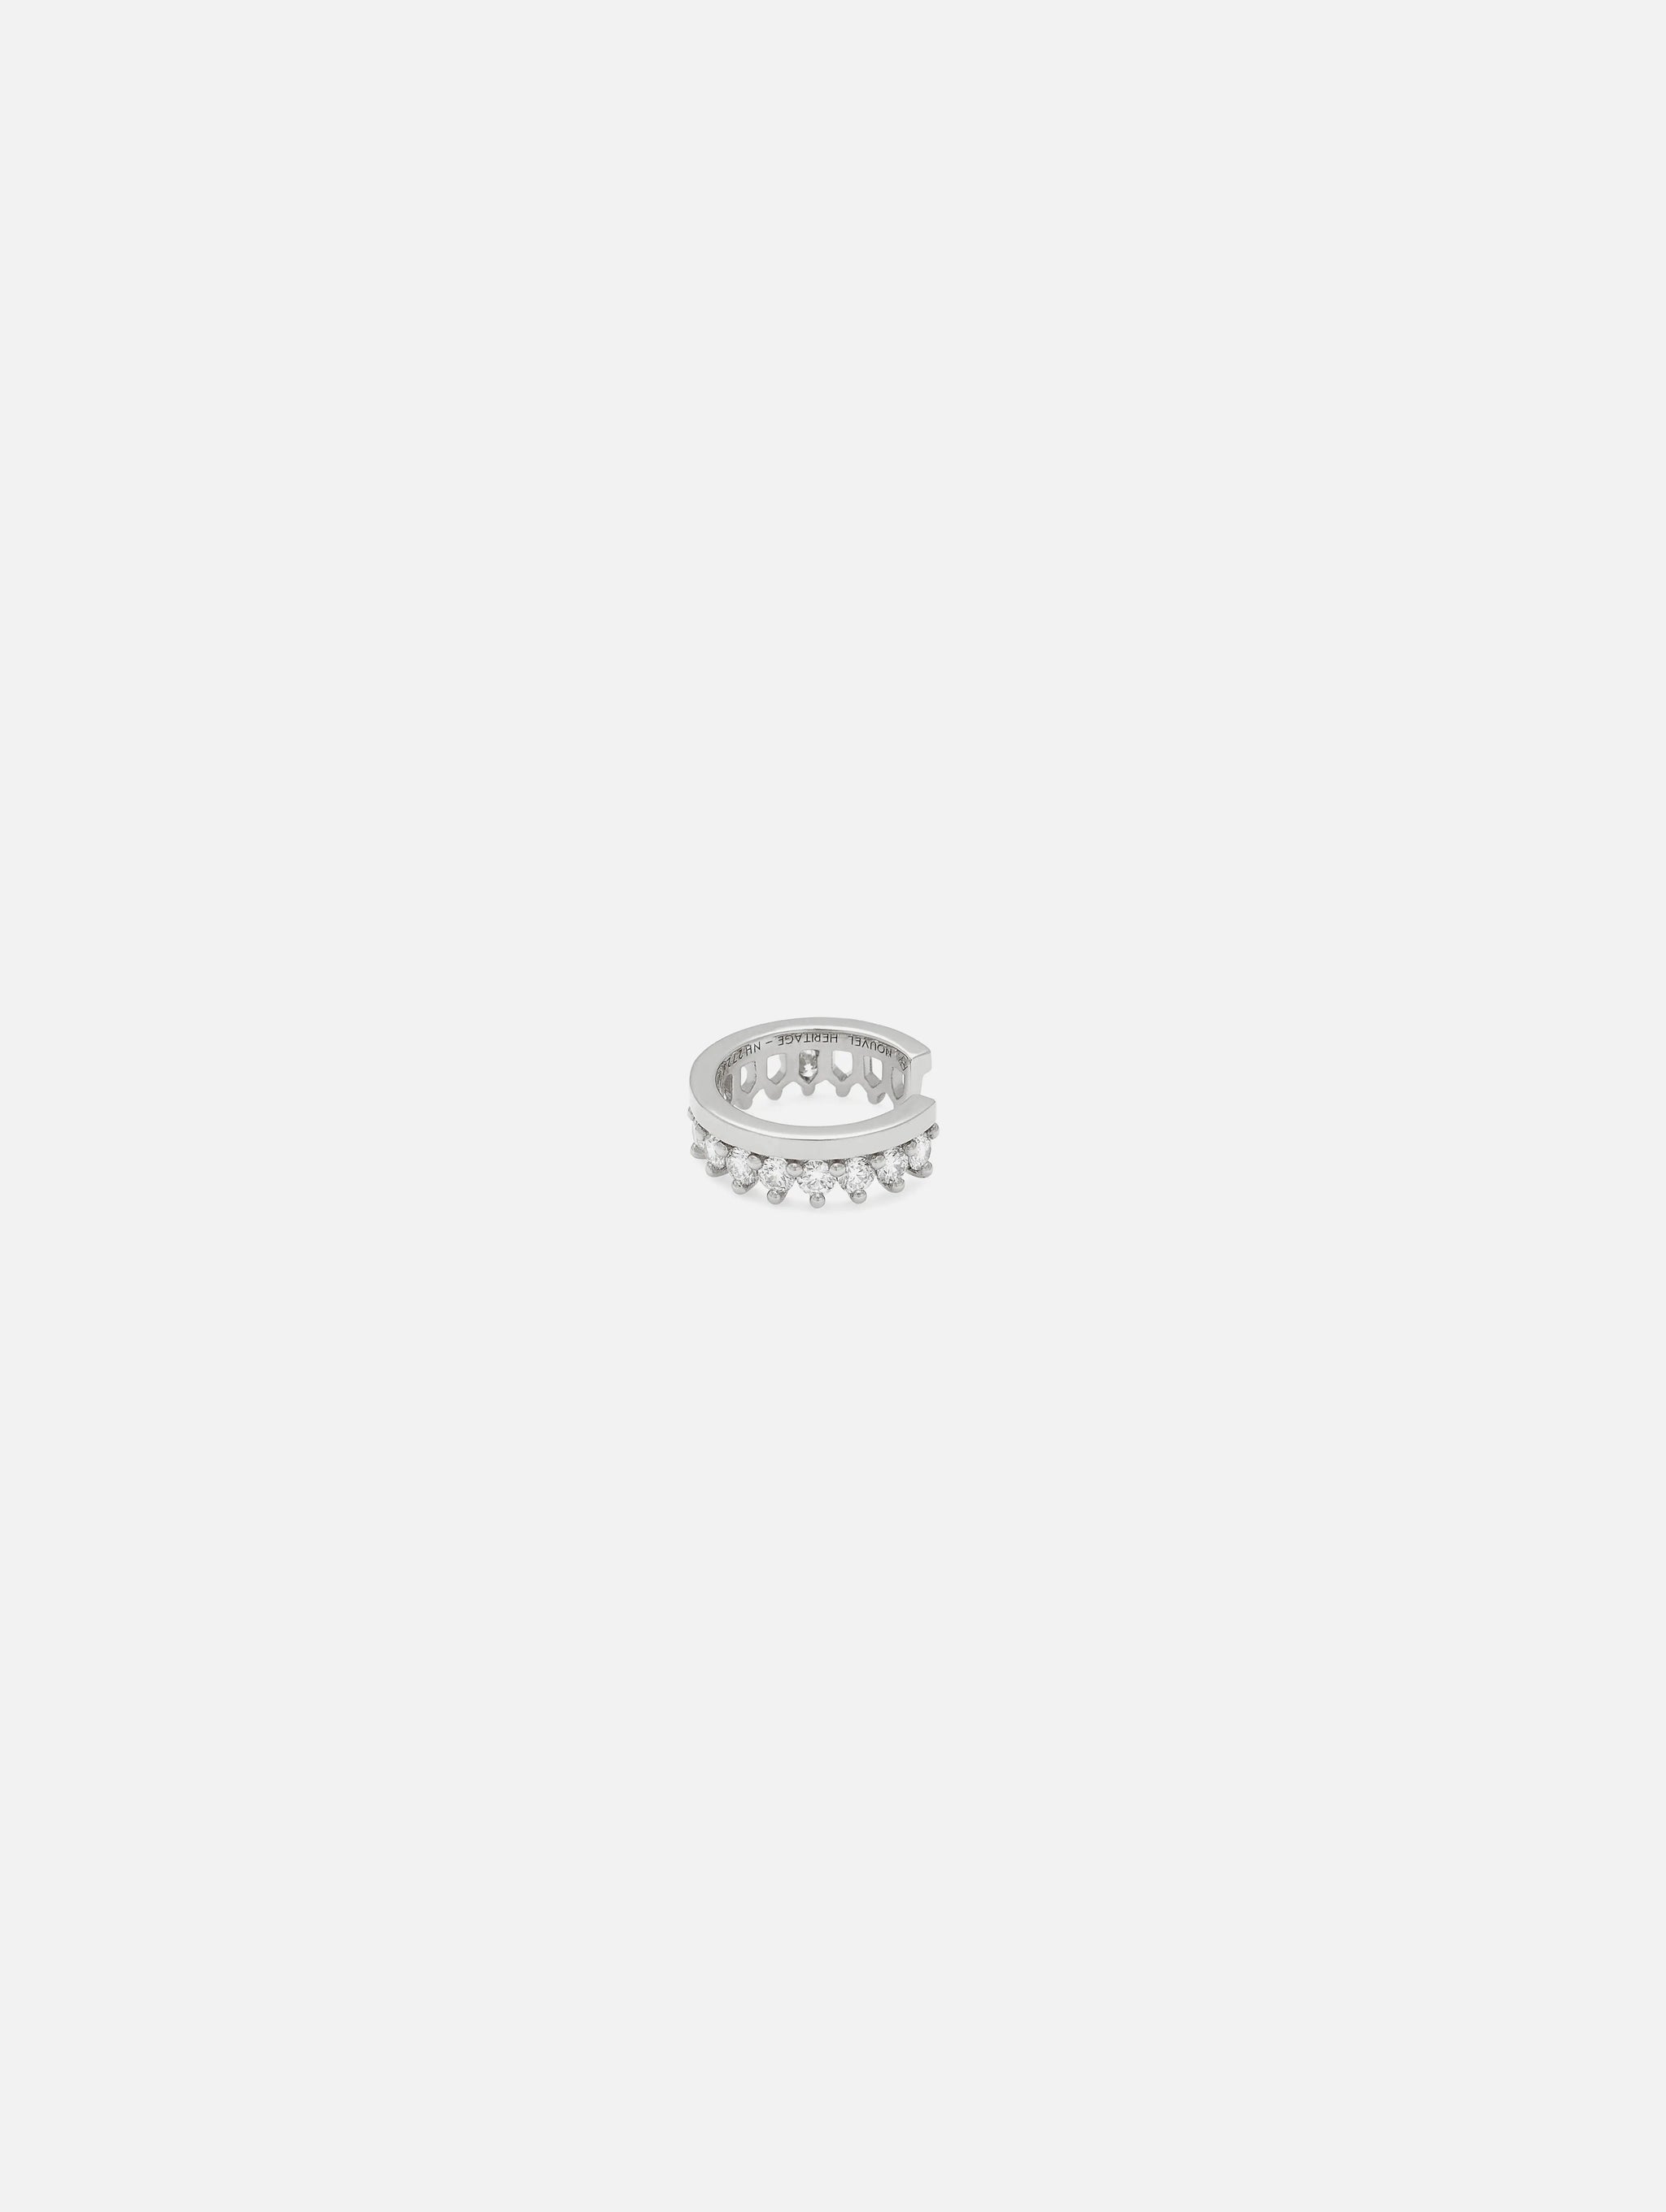 Simple Full Diamond Ear Cuff in White Gold - 1 - Nouvel Heritage